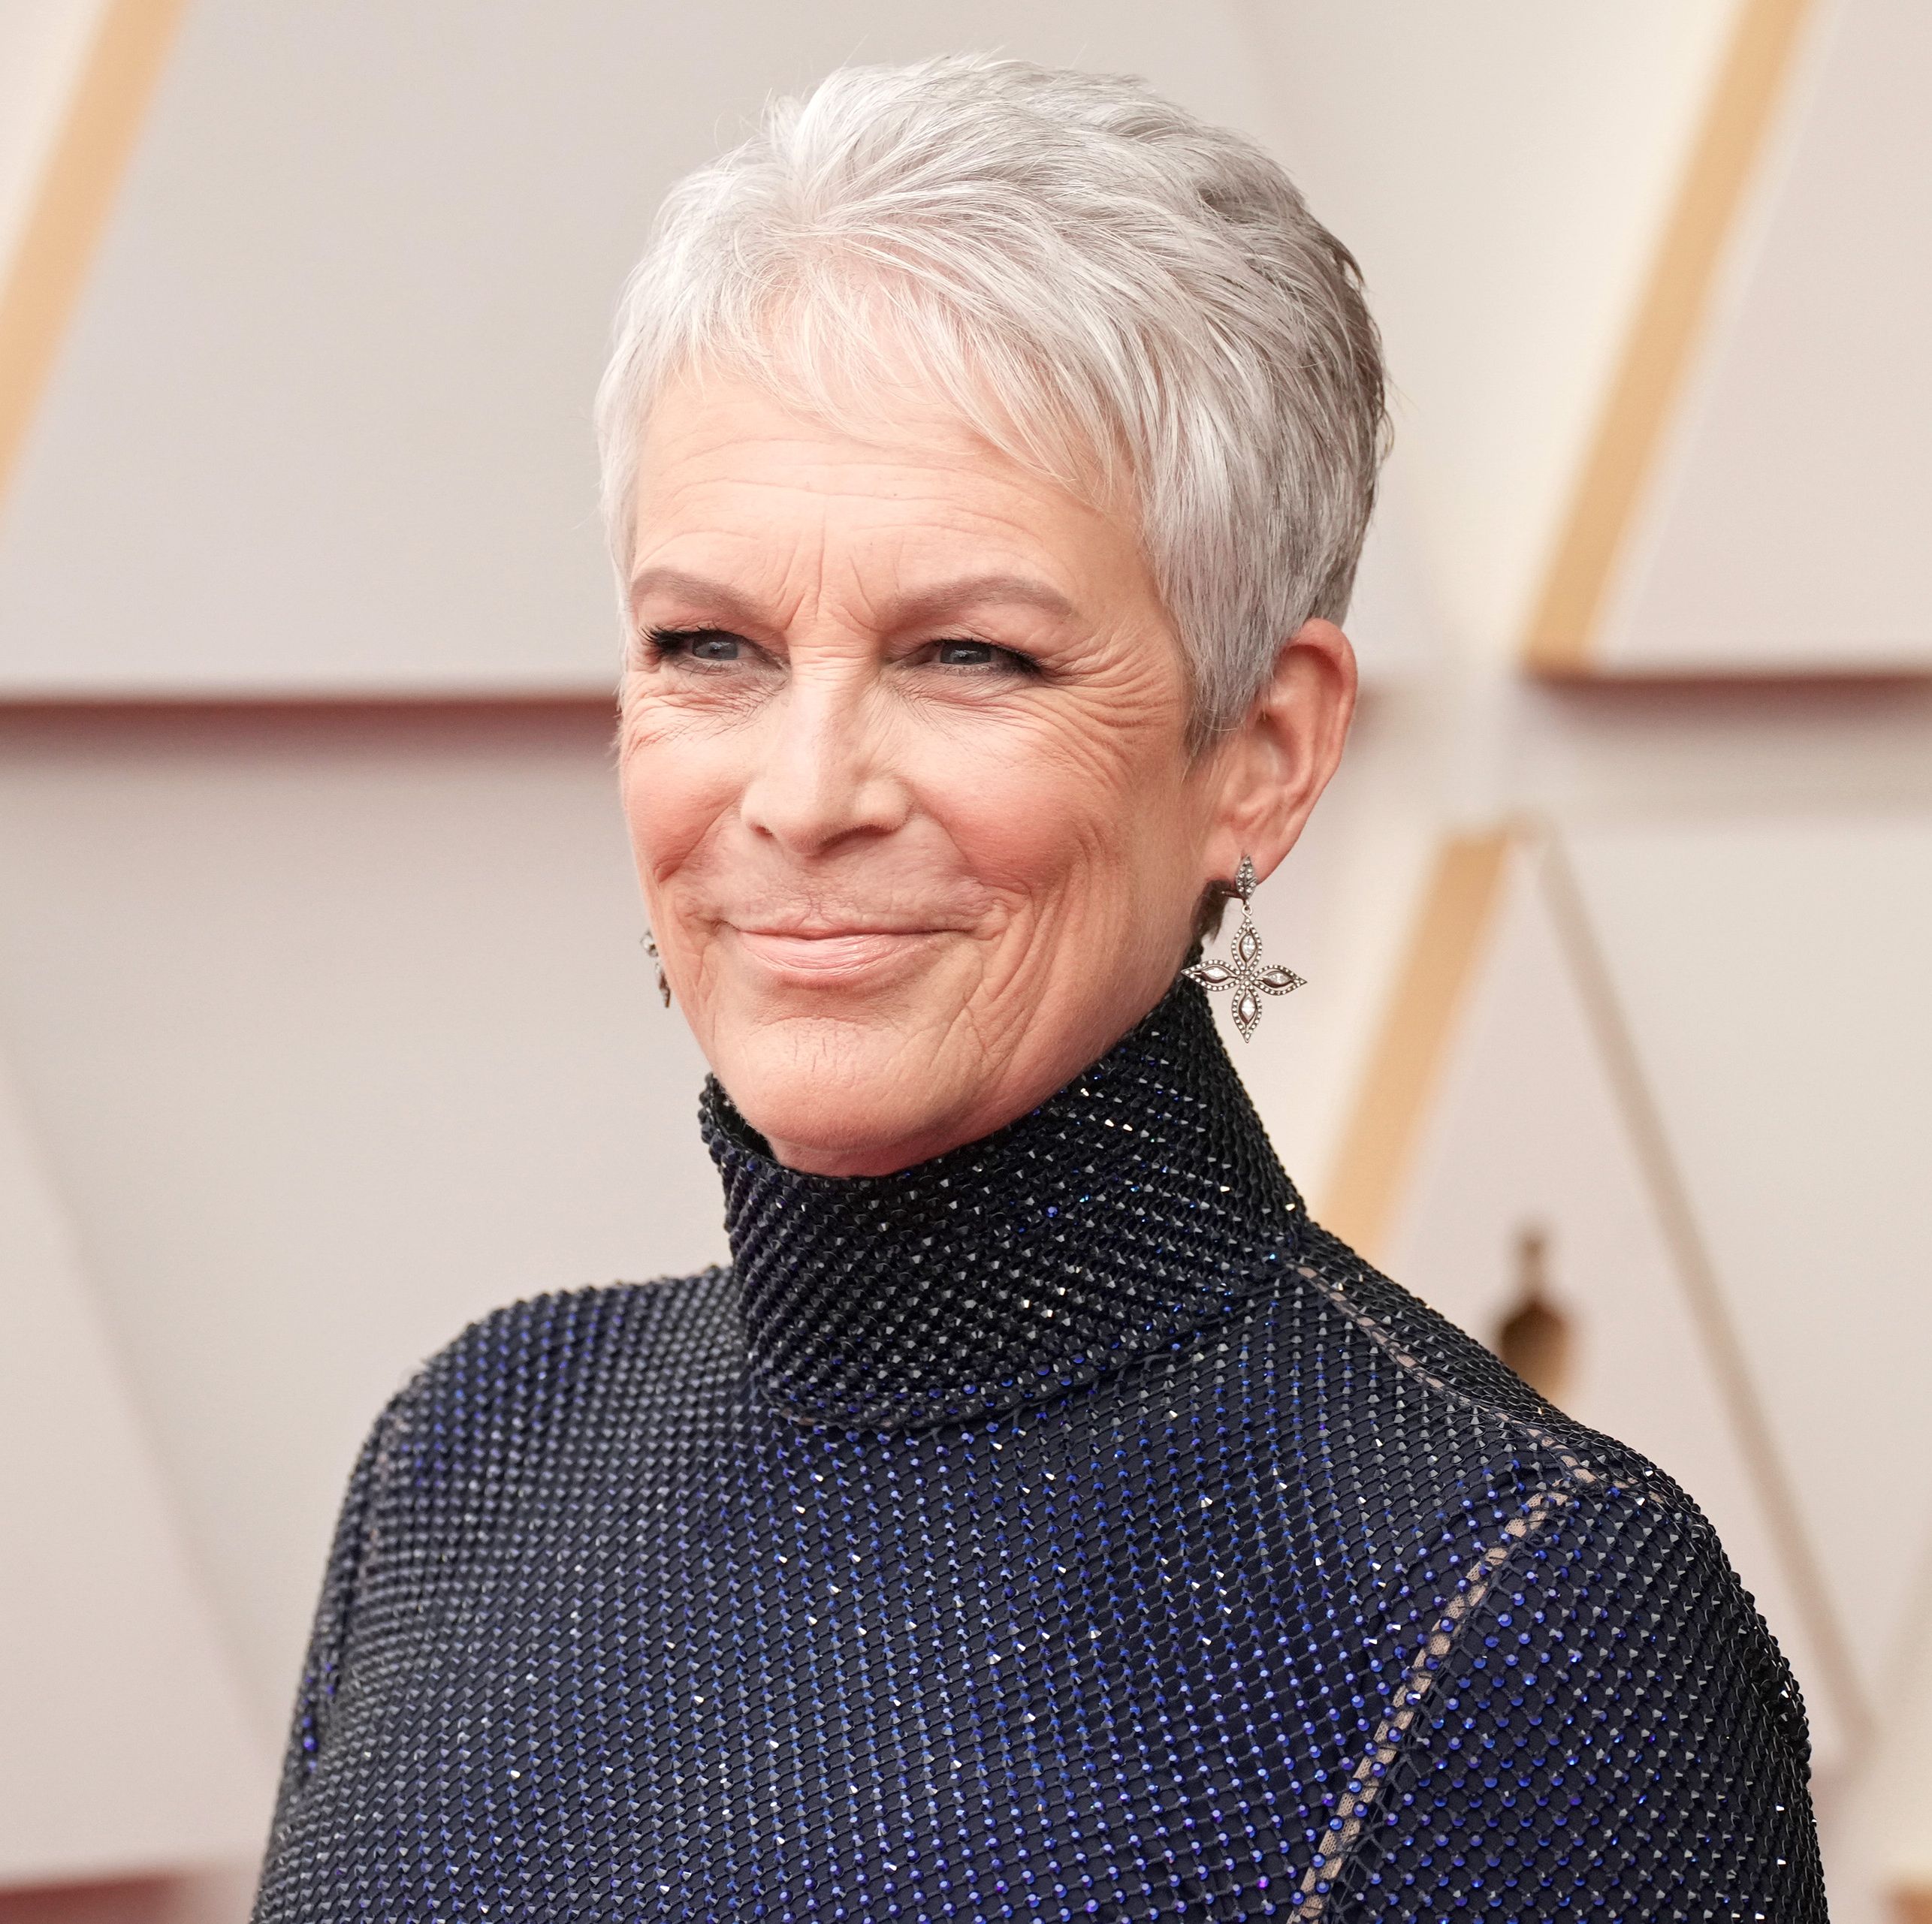 Jamie Lee Curtis Posts Stunning New Throwback Pic From the '80s: 'Before the Glam Squads'